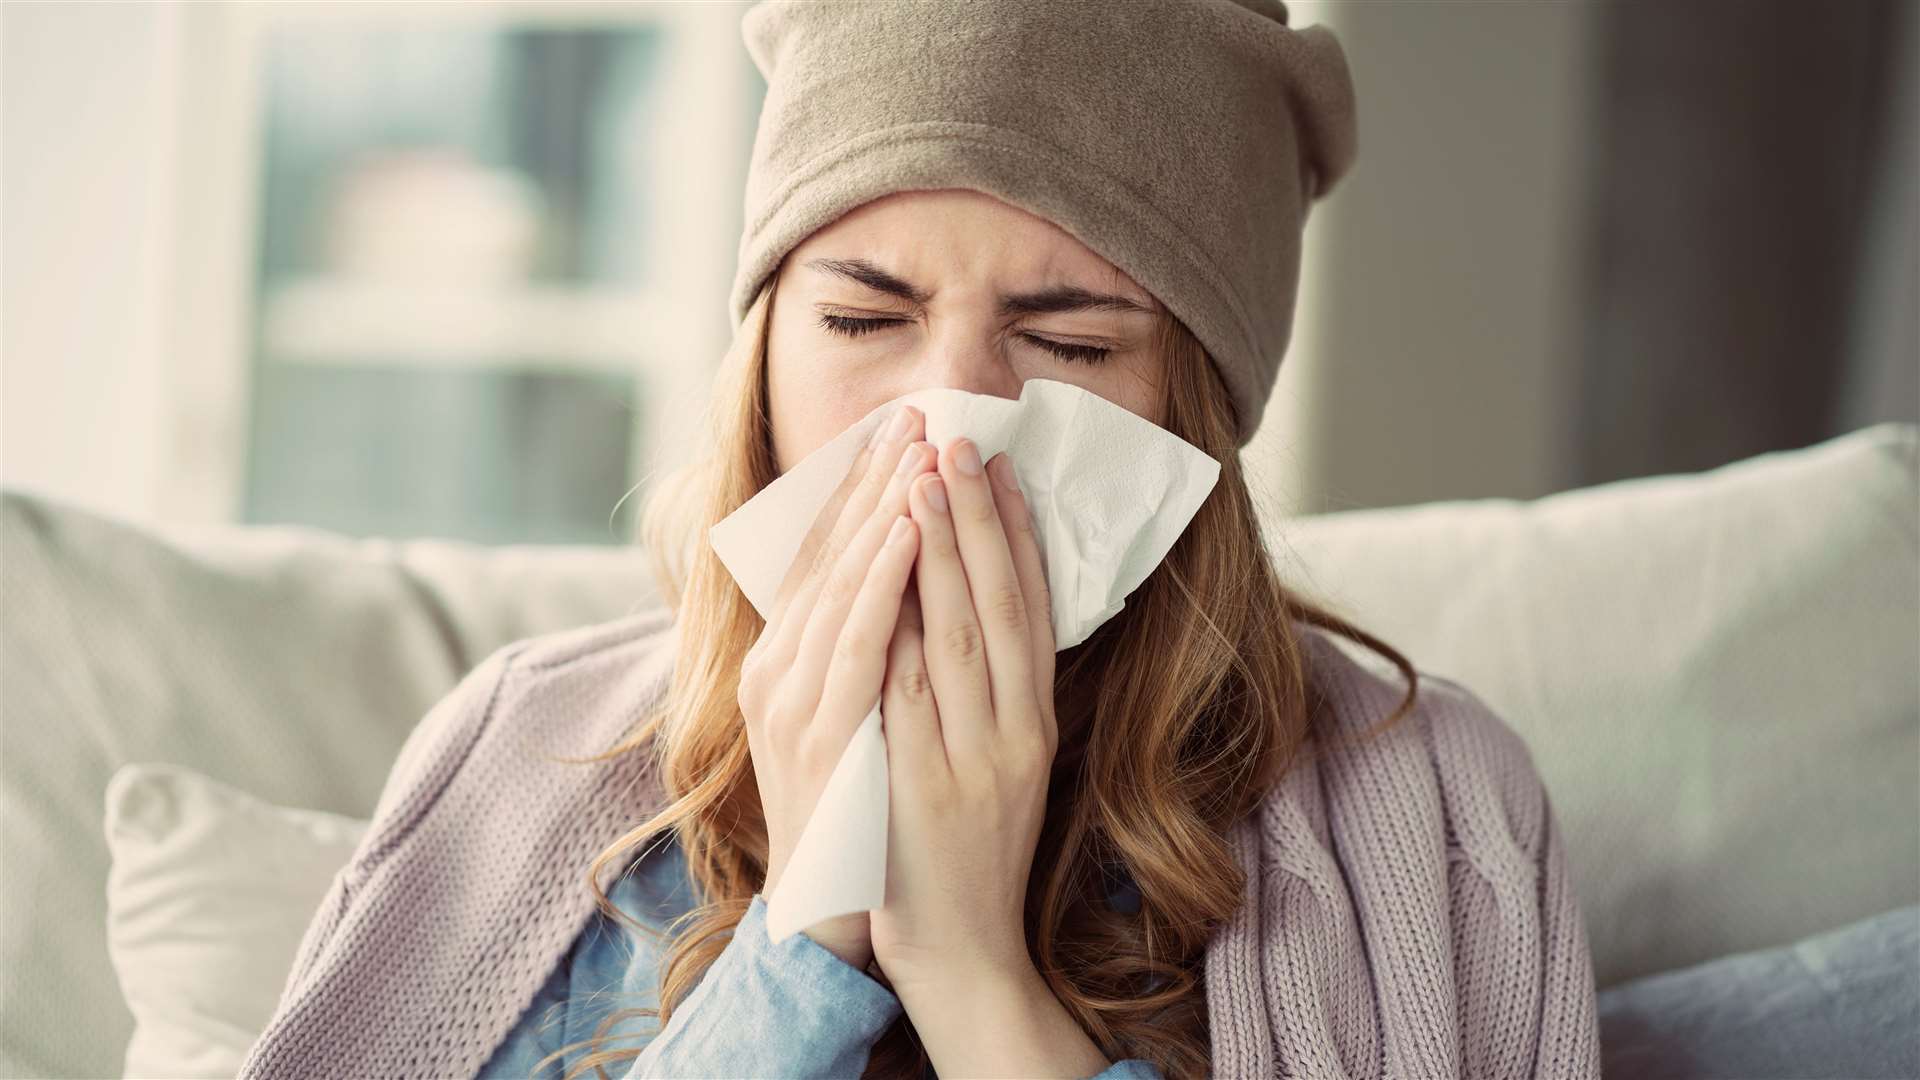 Many people have been suffering from cold and flu symptoms this winter.